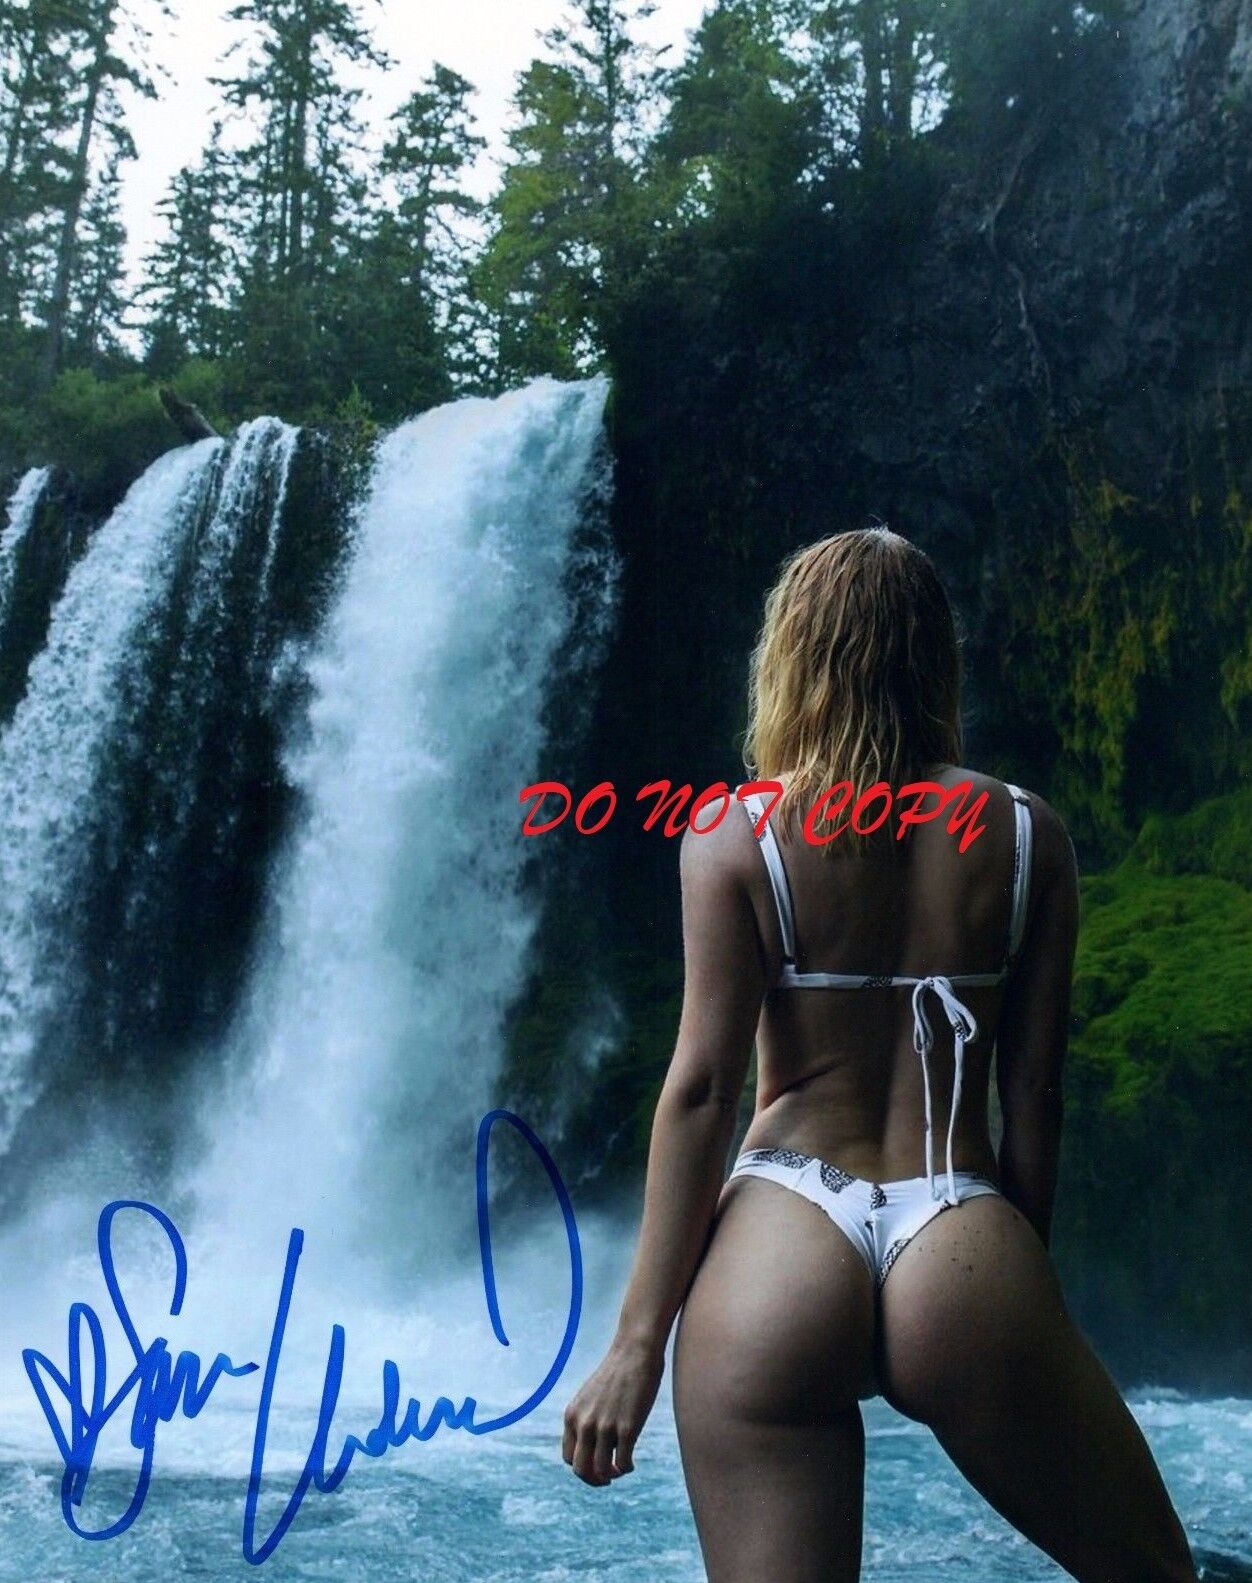 SARA shop JEAN UNDERWOOD - PLAYBOY SIGNE PICTURE At the price AUTOGRAPHED PLAYMATE